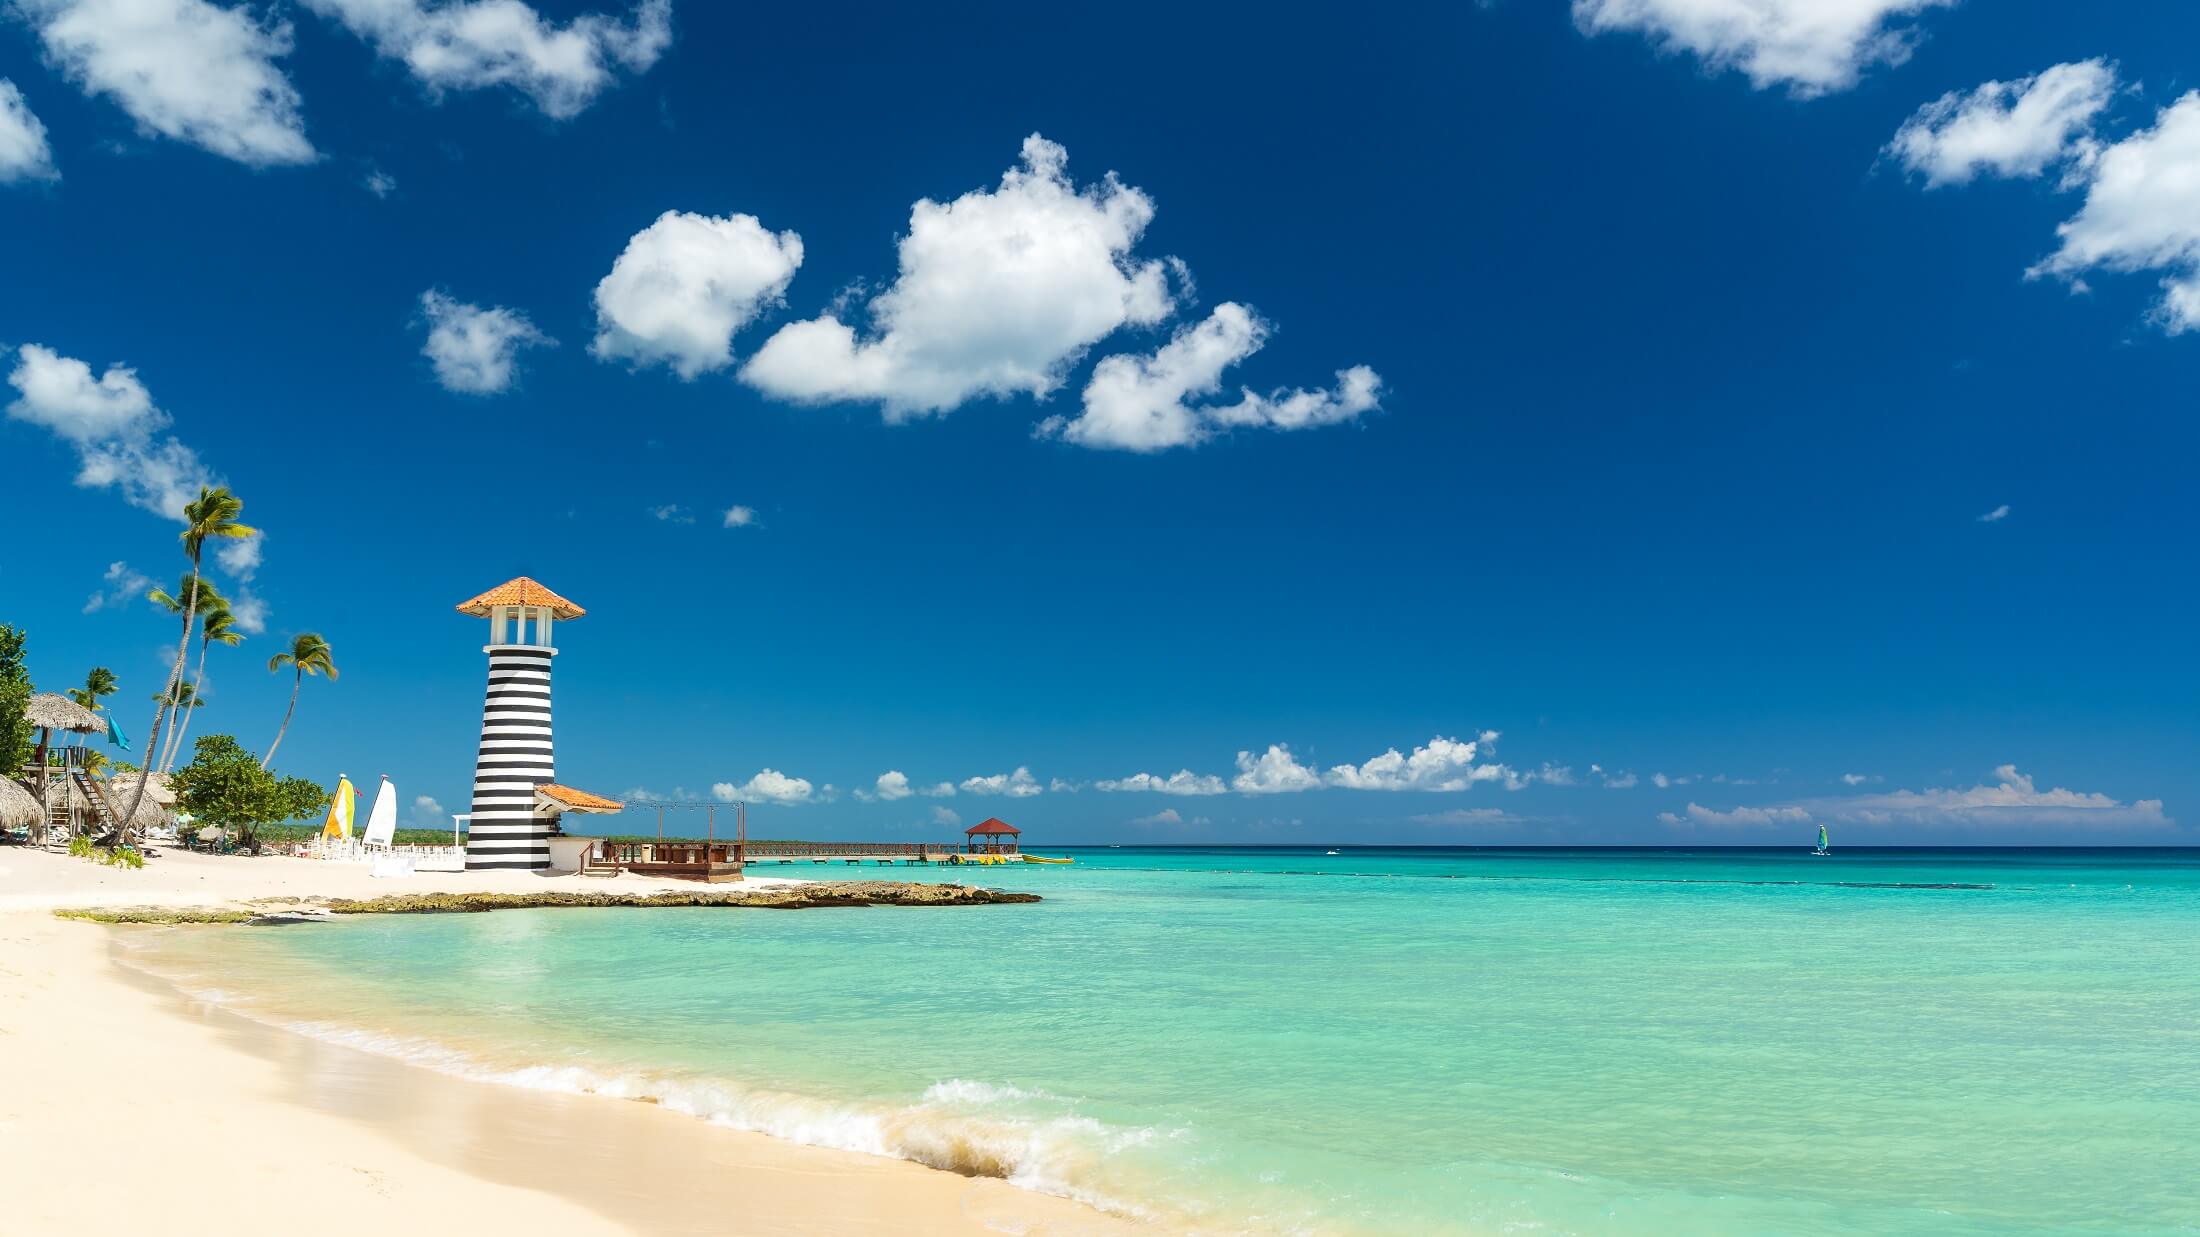 Lighthouse on the beach of the Caribbean, Dominican Republic, Bayahibe - Summer Vacation Concept